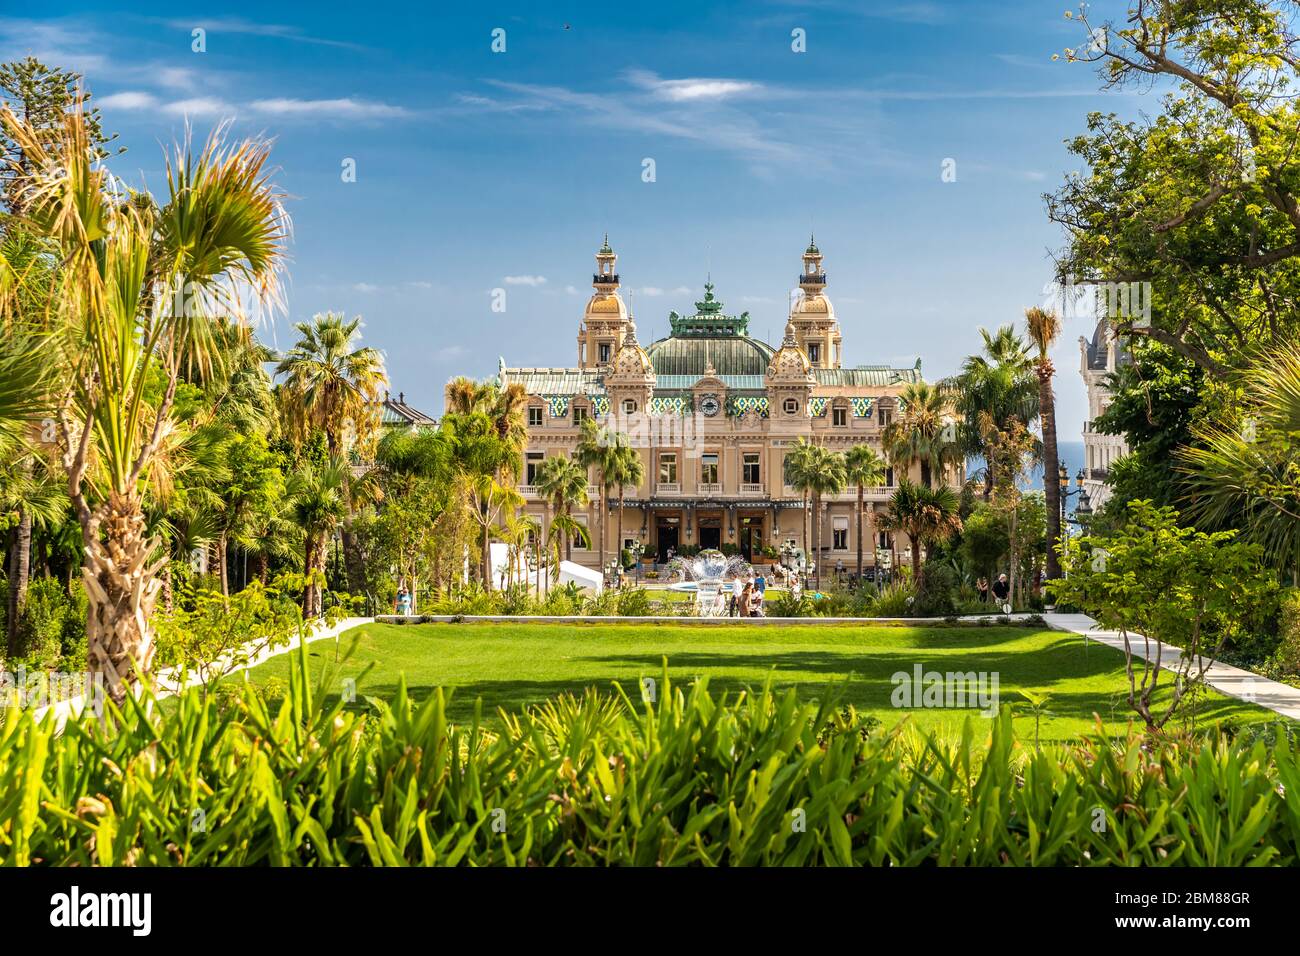 Monaco, Monte-Carlo, 02 October 2019: Casino Monte Carlo, main sight of the principality casino surrounded of the green trees, the updated facade Stock Photo